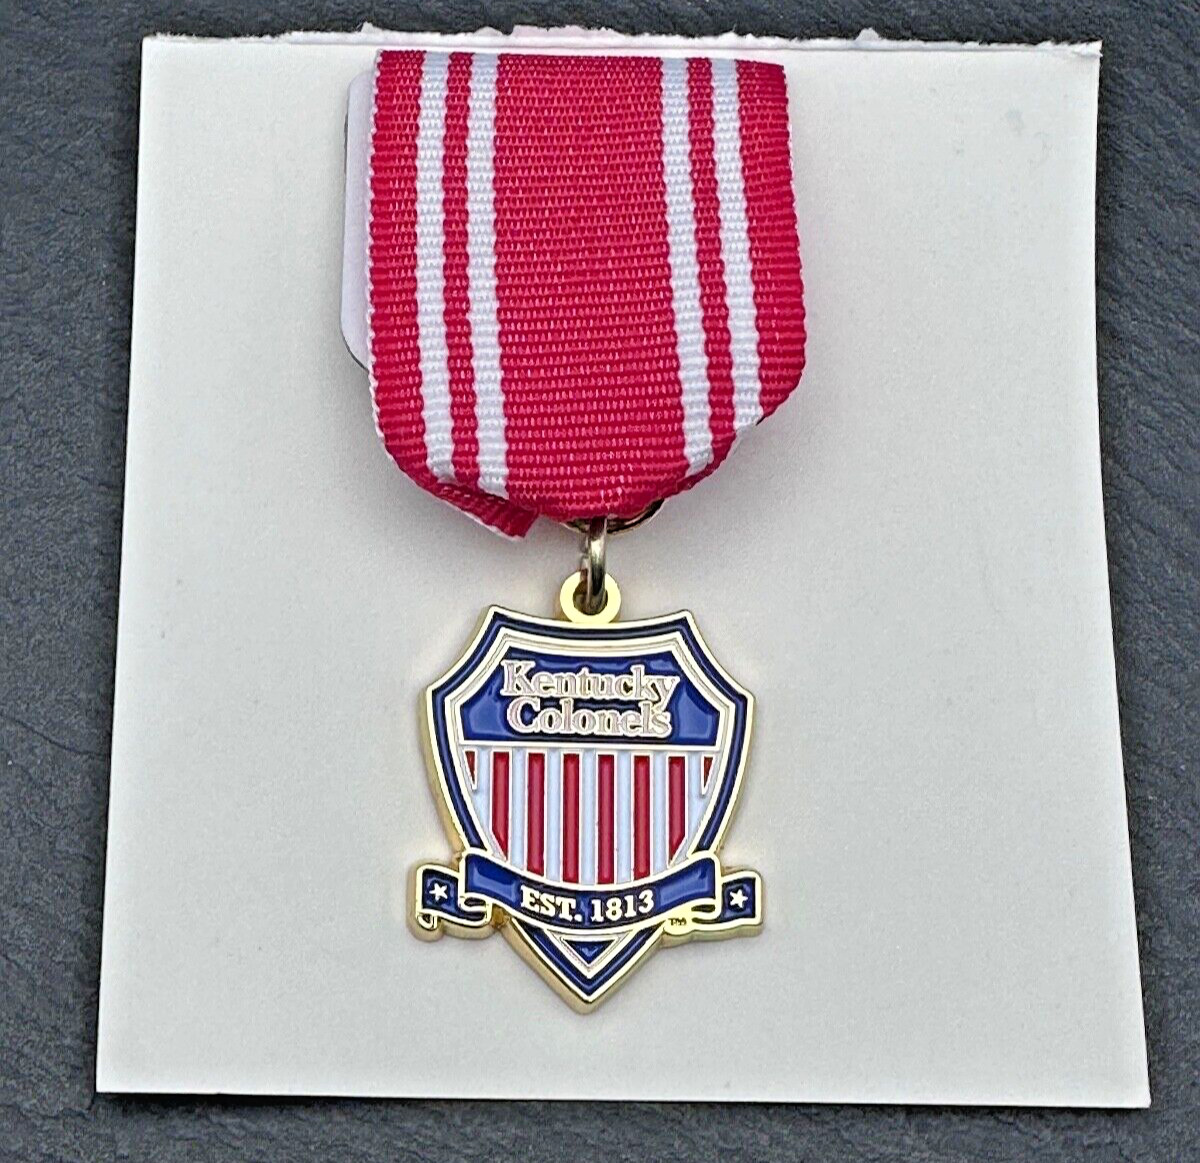 HONORABLE ORDER OF KENTUCKY COLONELS 2020 RED & BLUE RIBBON MEDAL B165